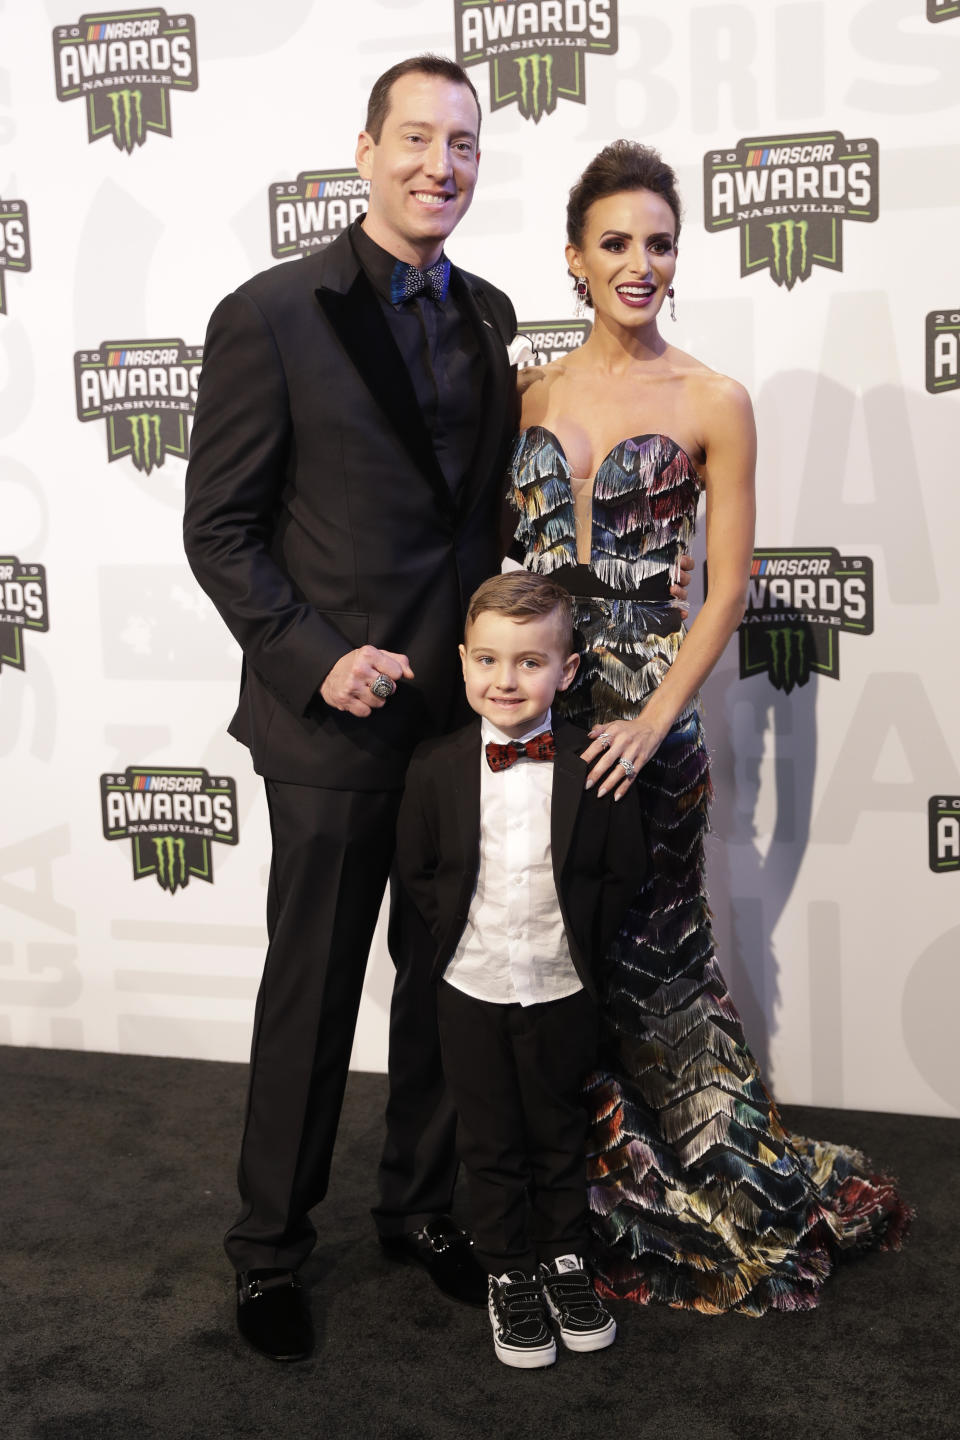 FILE -Driver Kyle Busch, his wife, Samantha, and son, Brexton, arrive for the NASCAR Cup Series Awards Thursday, Dec. 5, 2019, in Nashville, Tenn. Kyle Busch will move to Richard Childress Racing next season, ending a 15-year career with Joe Gibbs Racing because the team could not come to terms with NASCAR’s only active multiple Cup champion. Busch will drive the No. 8 Chevrolet for Childress in an announcement made Tuesday, Sept. 13, 2022, at the NASCAR Hall of Fame. (AP Photo/Mark Humphrey, File)